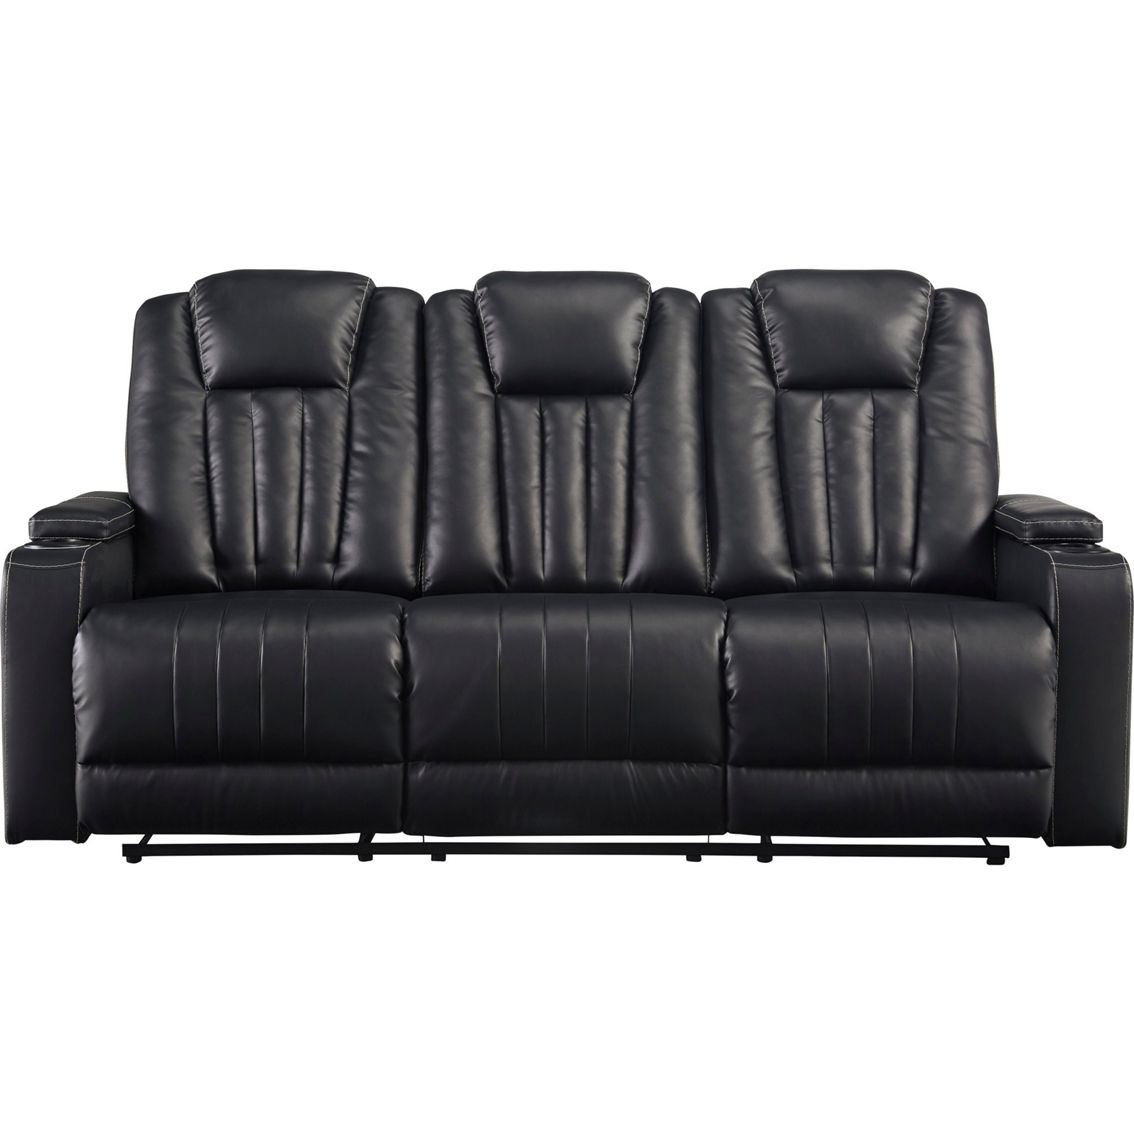 Signature Design by Ashley Center Point Reclining Sofa with Drop Down Table - Image 4 of 10